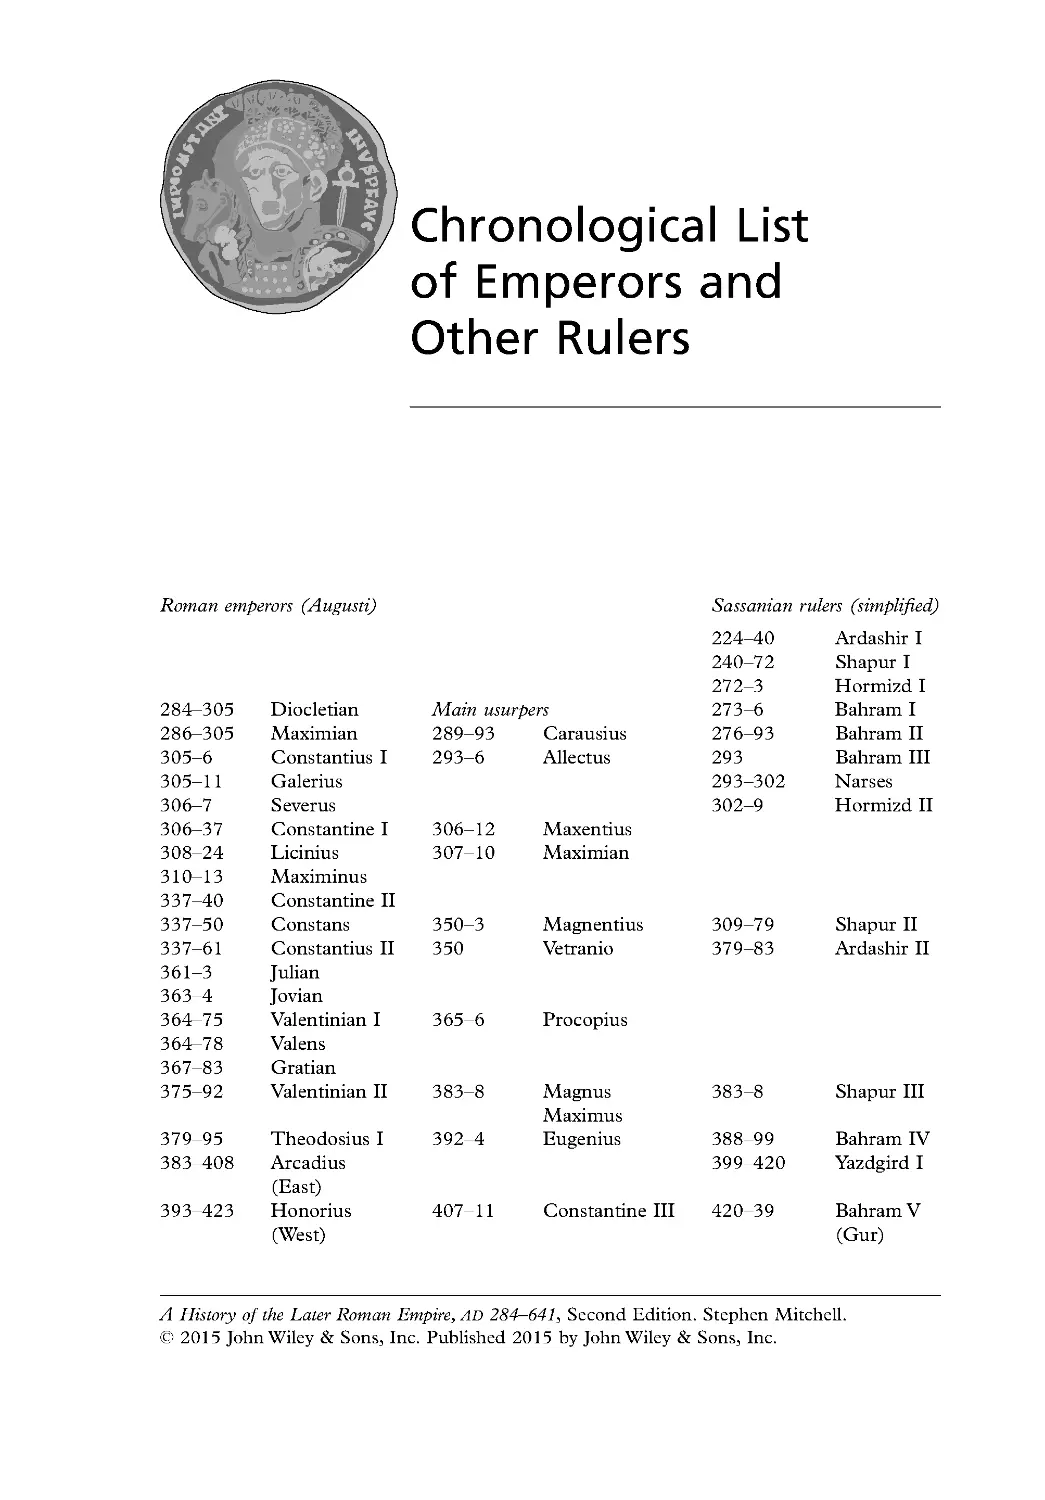 Chronological List of Emperors and Other Rulers